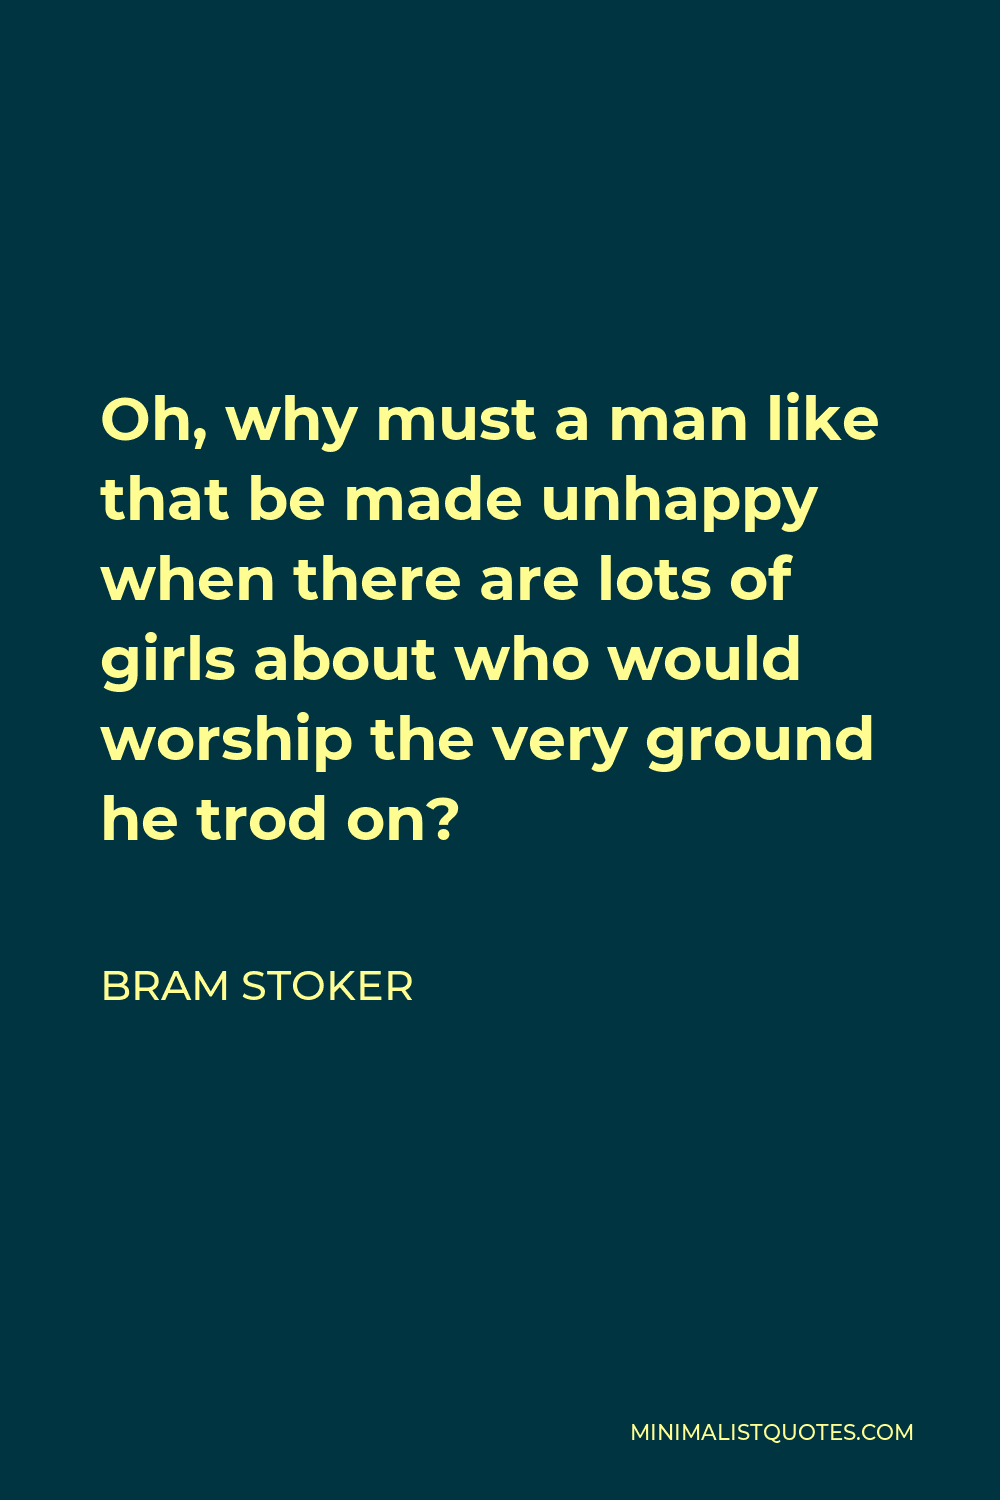 Bram Stoker Quote - Oh, why must a man like that be made unhappy when there are lots of girls about who would worship the very ground he trod on?